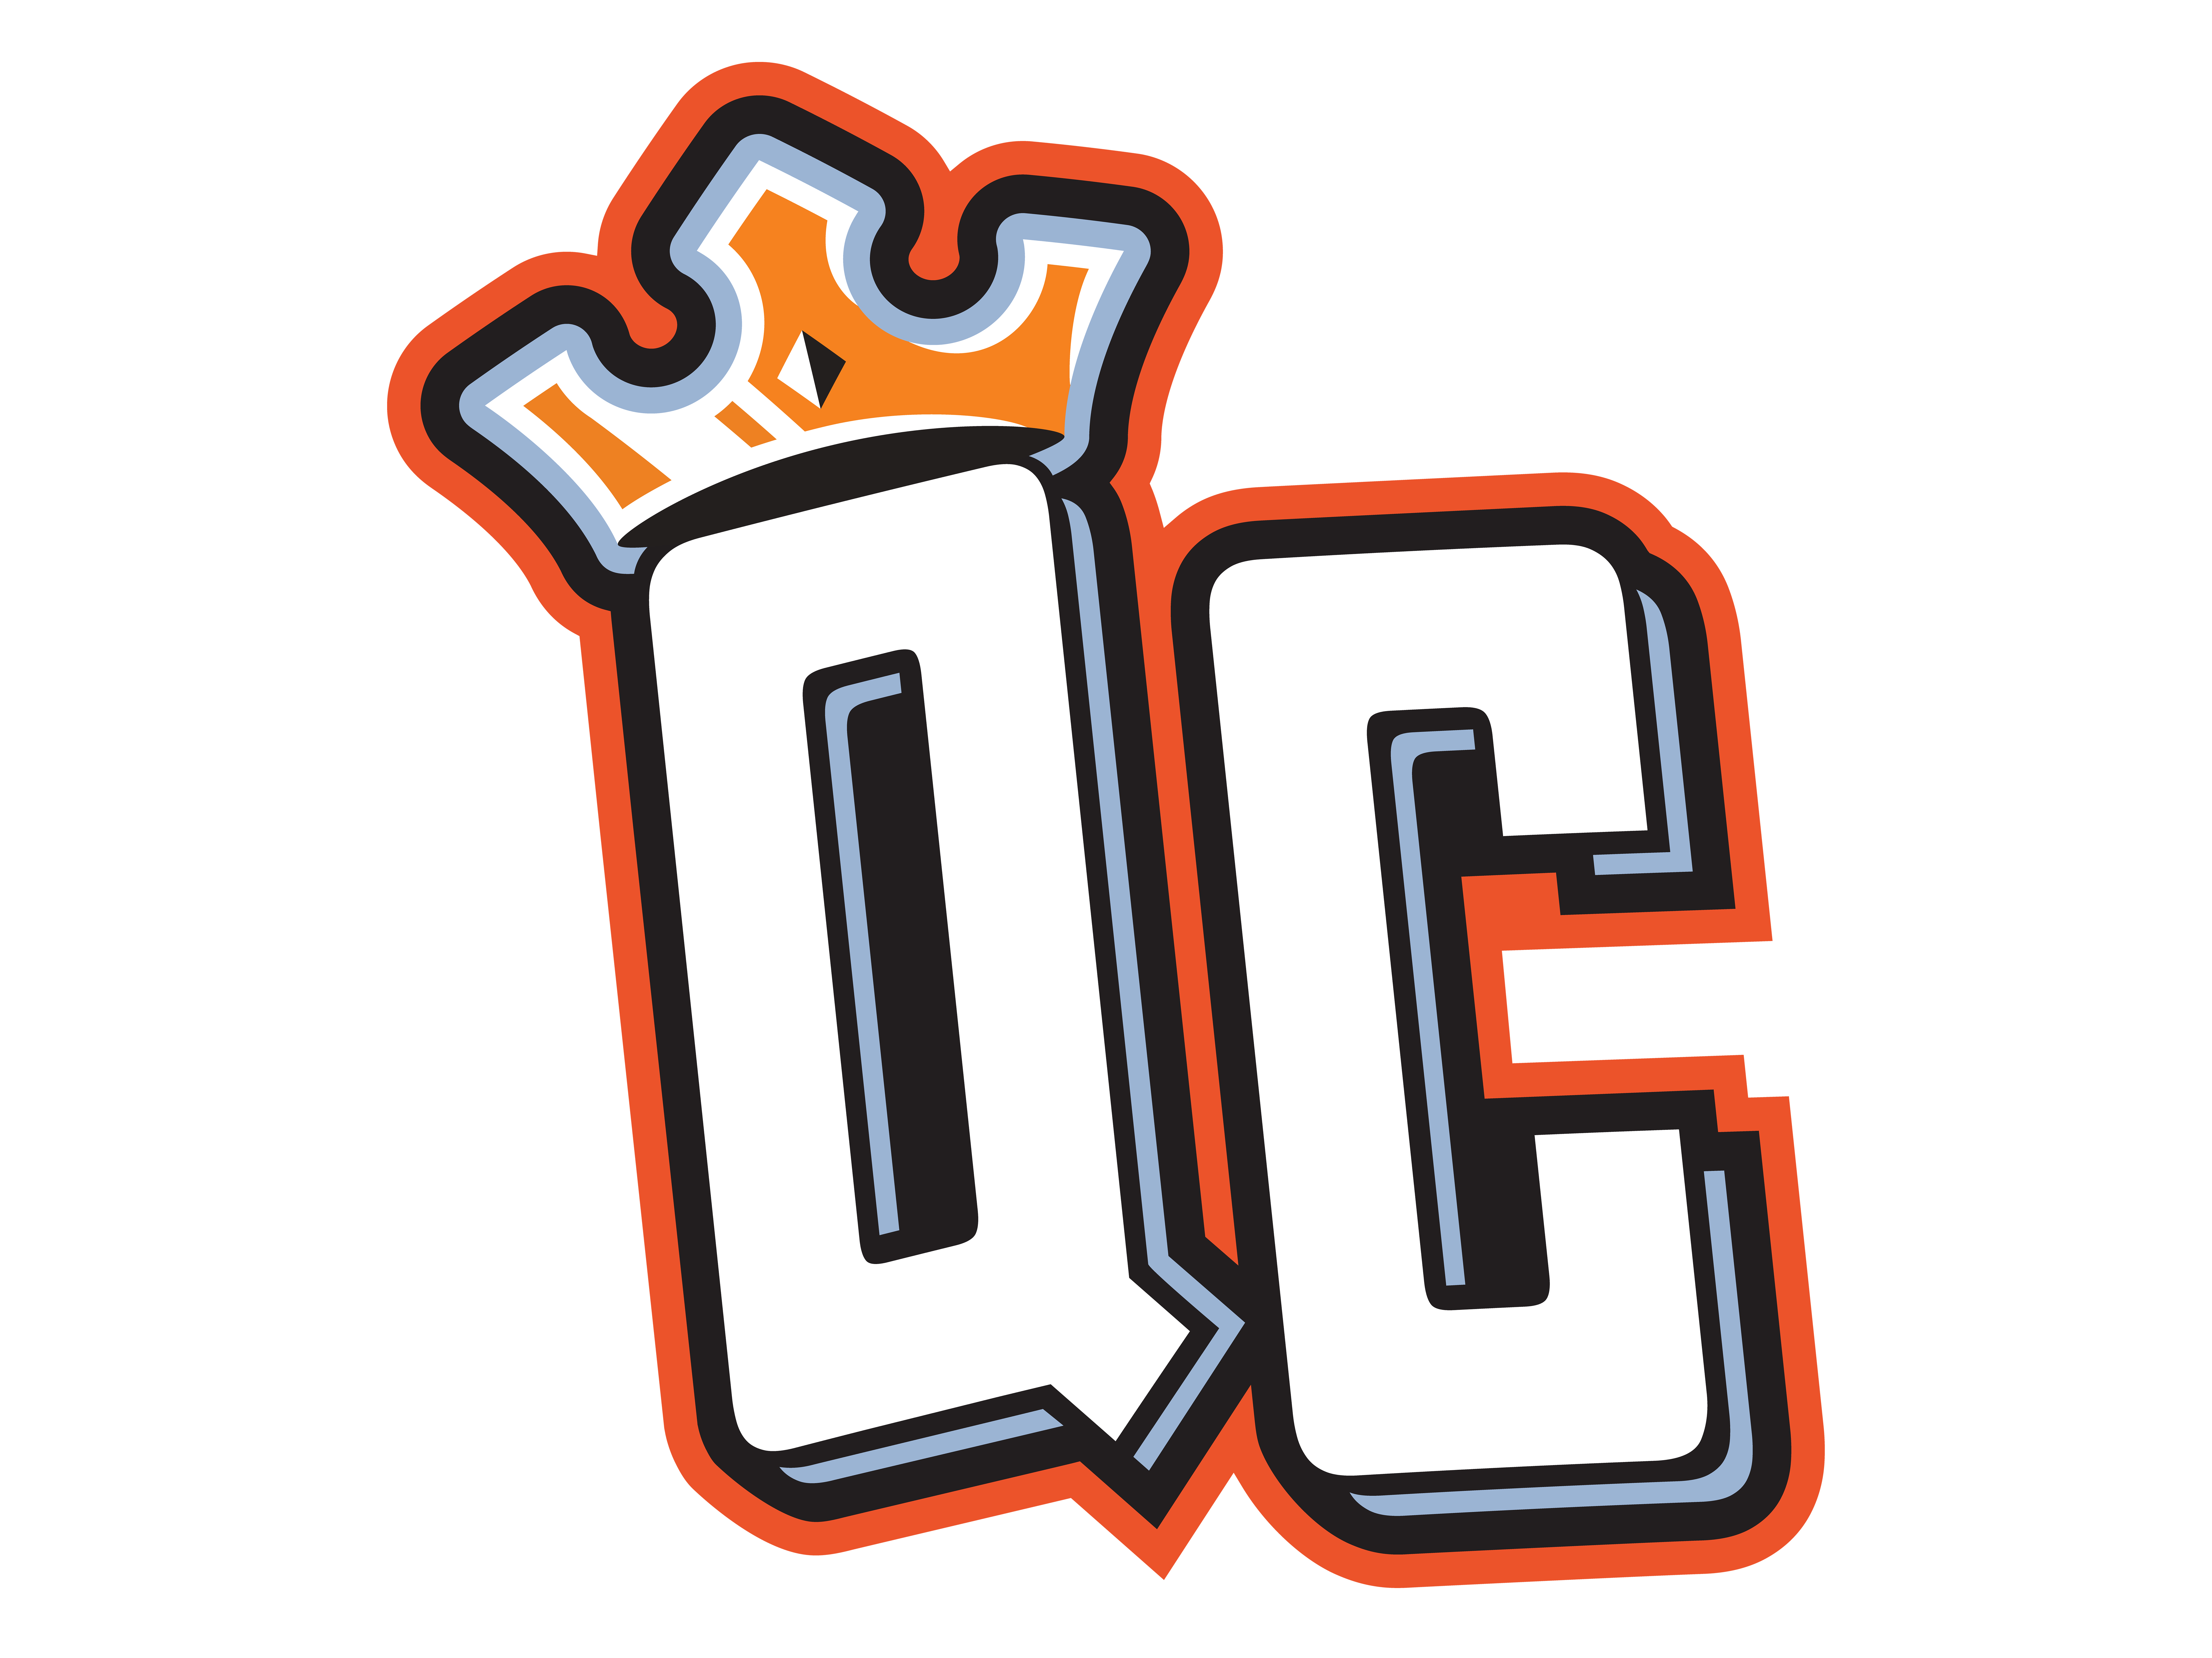 Qc Logo: Over 2,353 Royalty-Free Licensable Stock Illustrations & Drawings  | Shutterstock